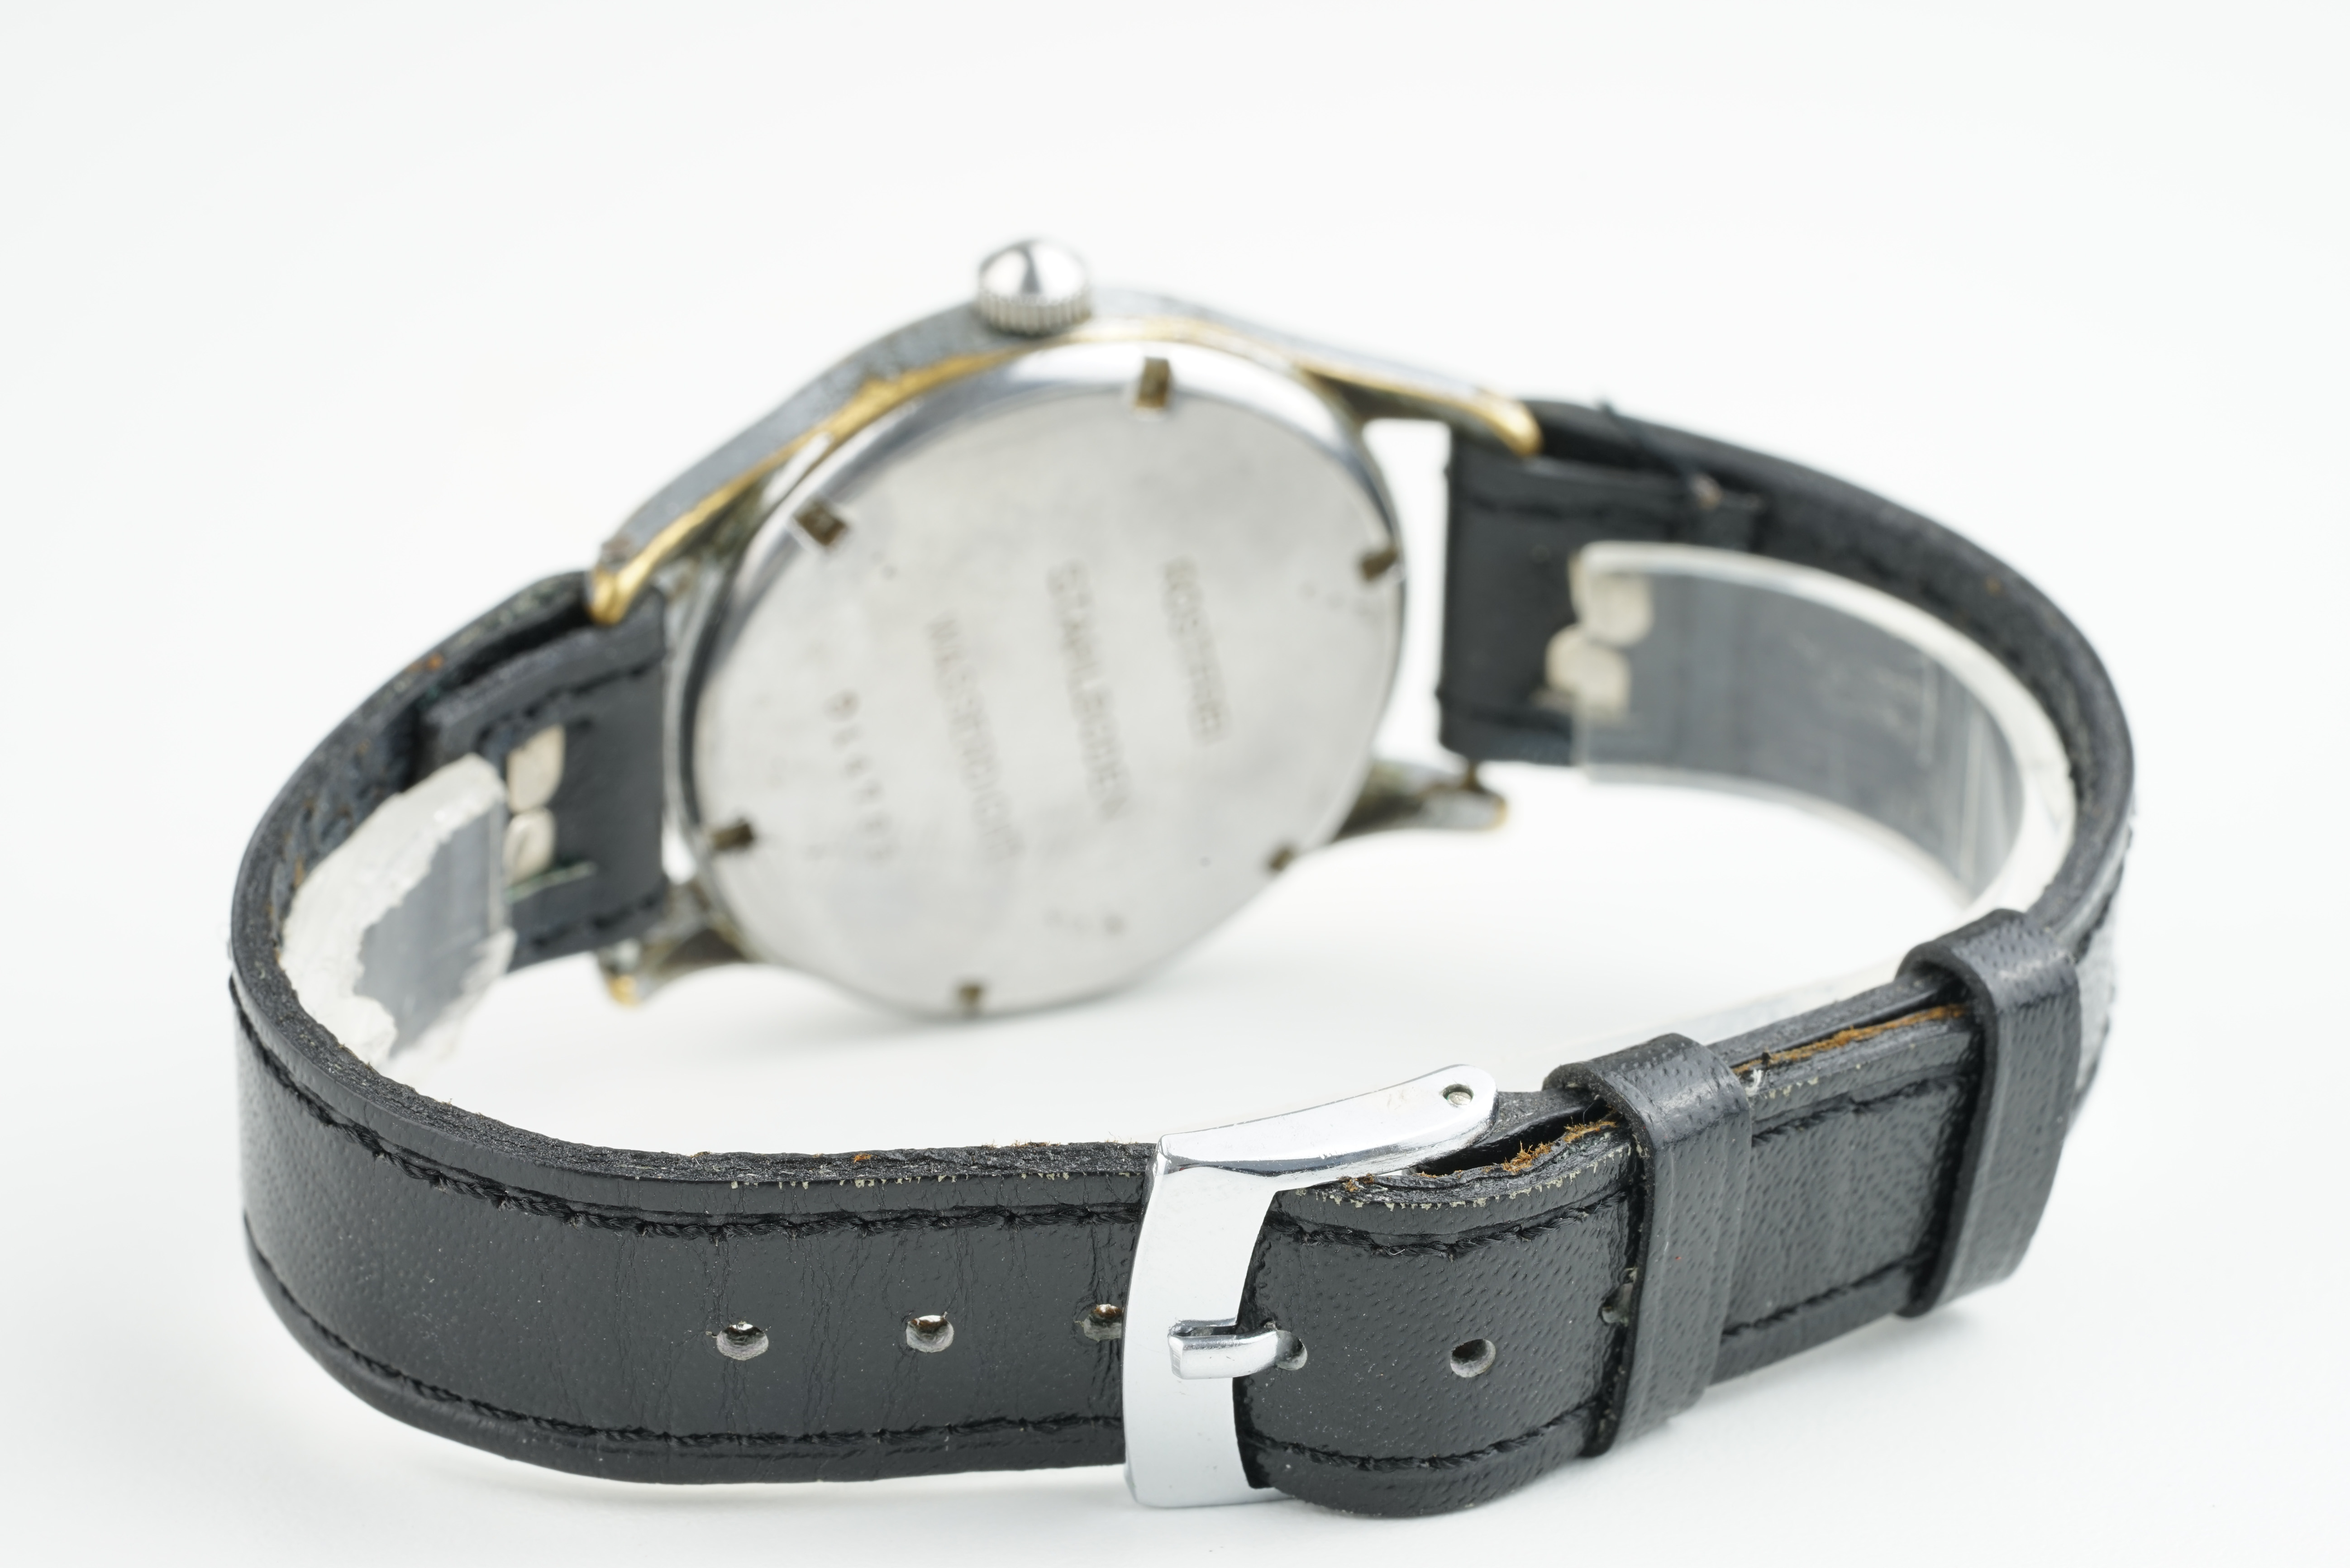 GENTLEMENS B.W.C. GERMAN MILITARY WRISTWATCH, circular black dial with hour markers and hands, - Image 2 of 2